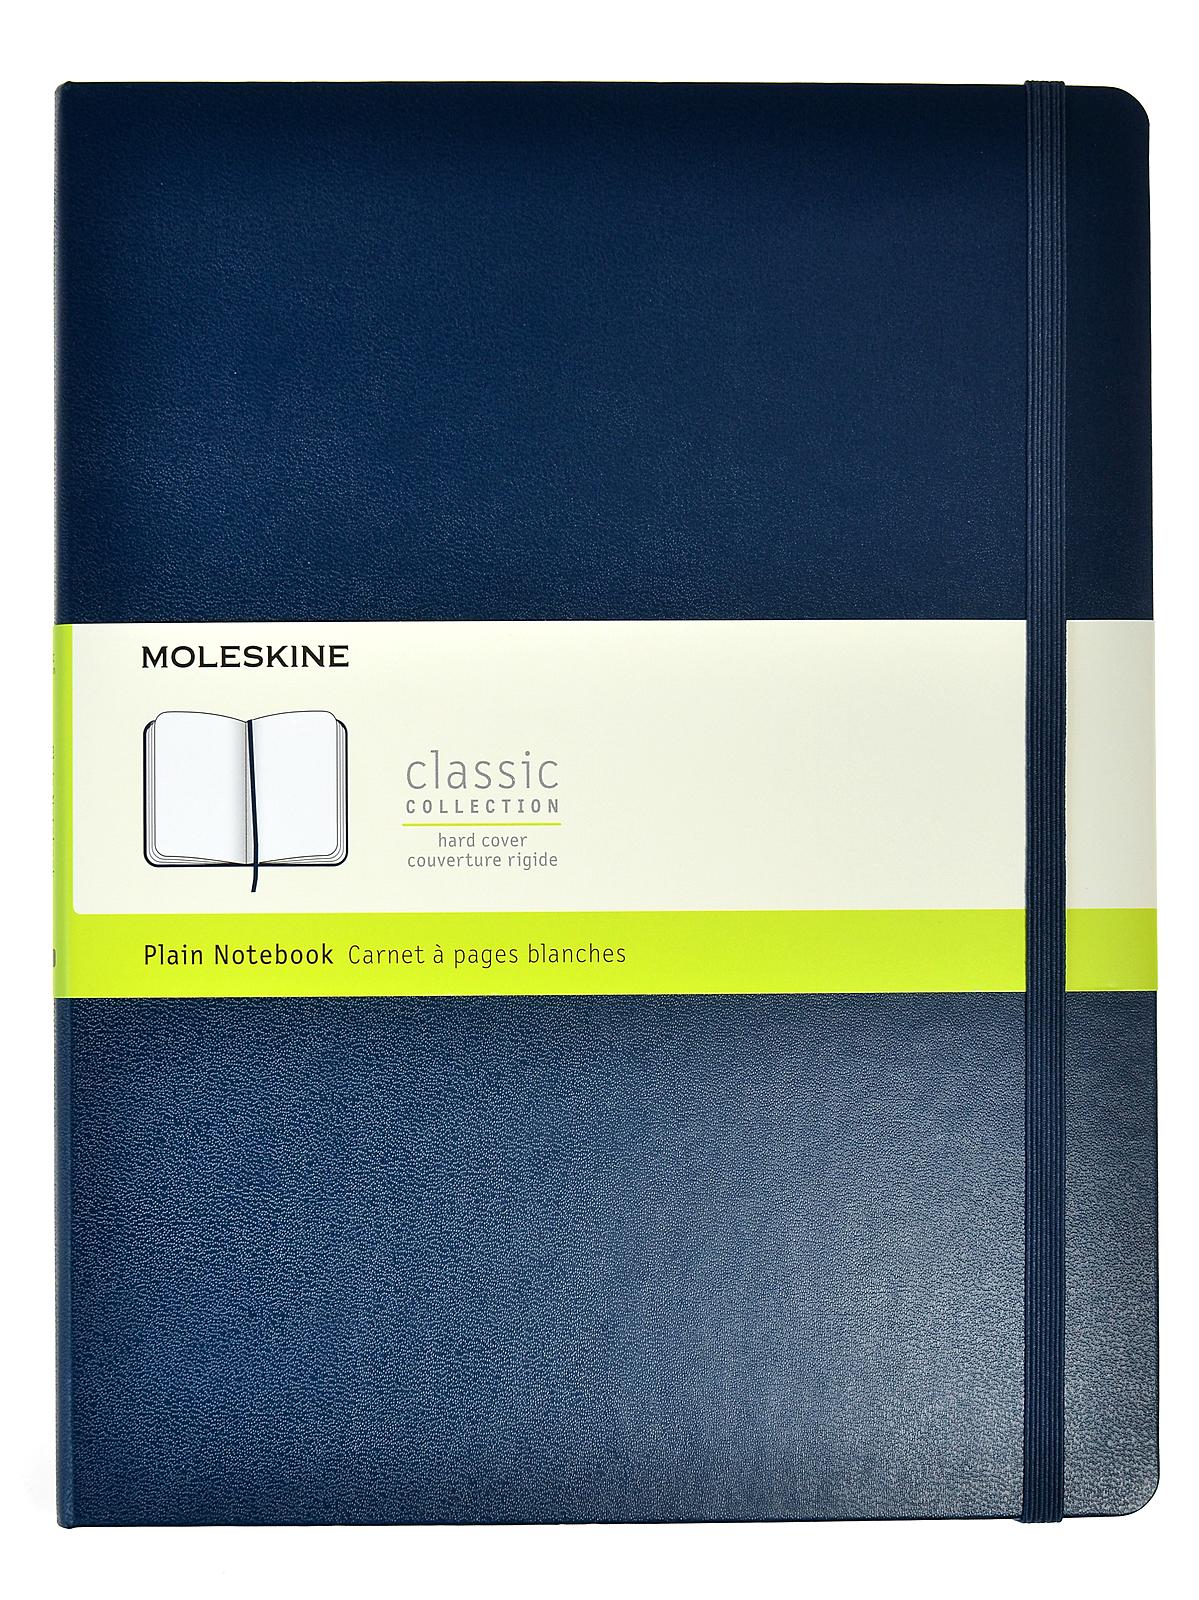 Classic Hard Cover Notebooks Black 7 1 2 In. X 9 3 4 In. 192 Pages, Unlined